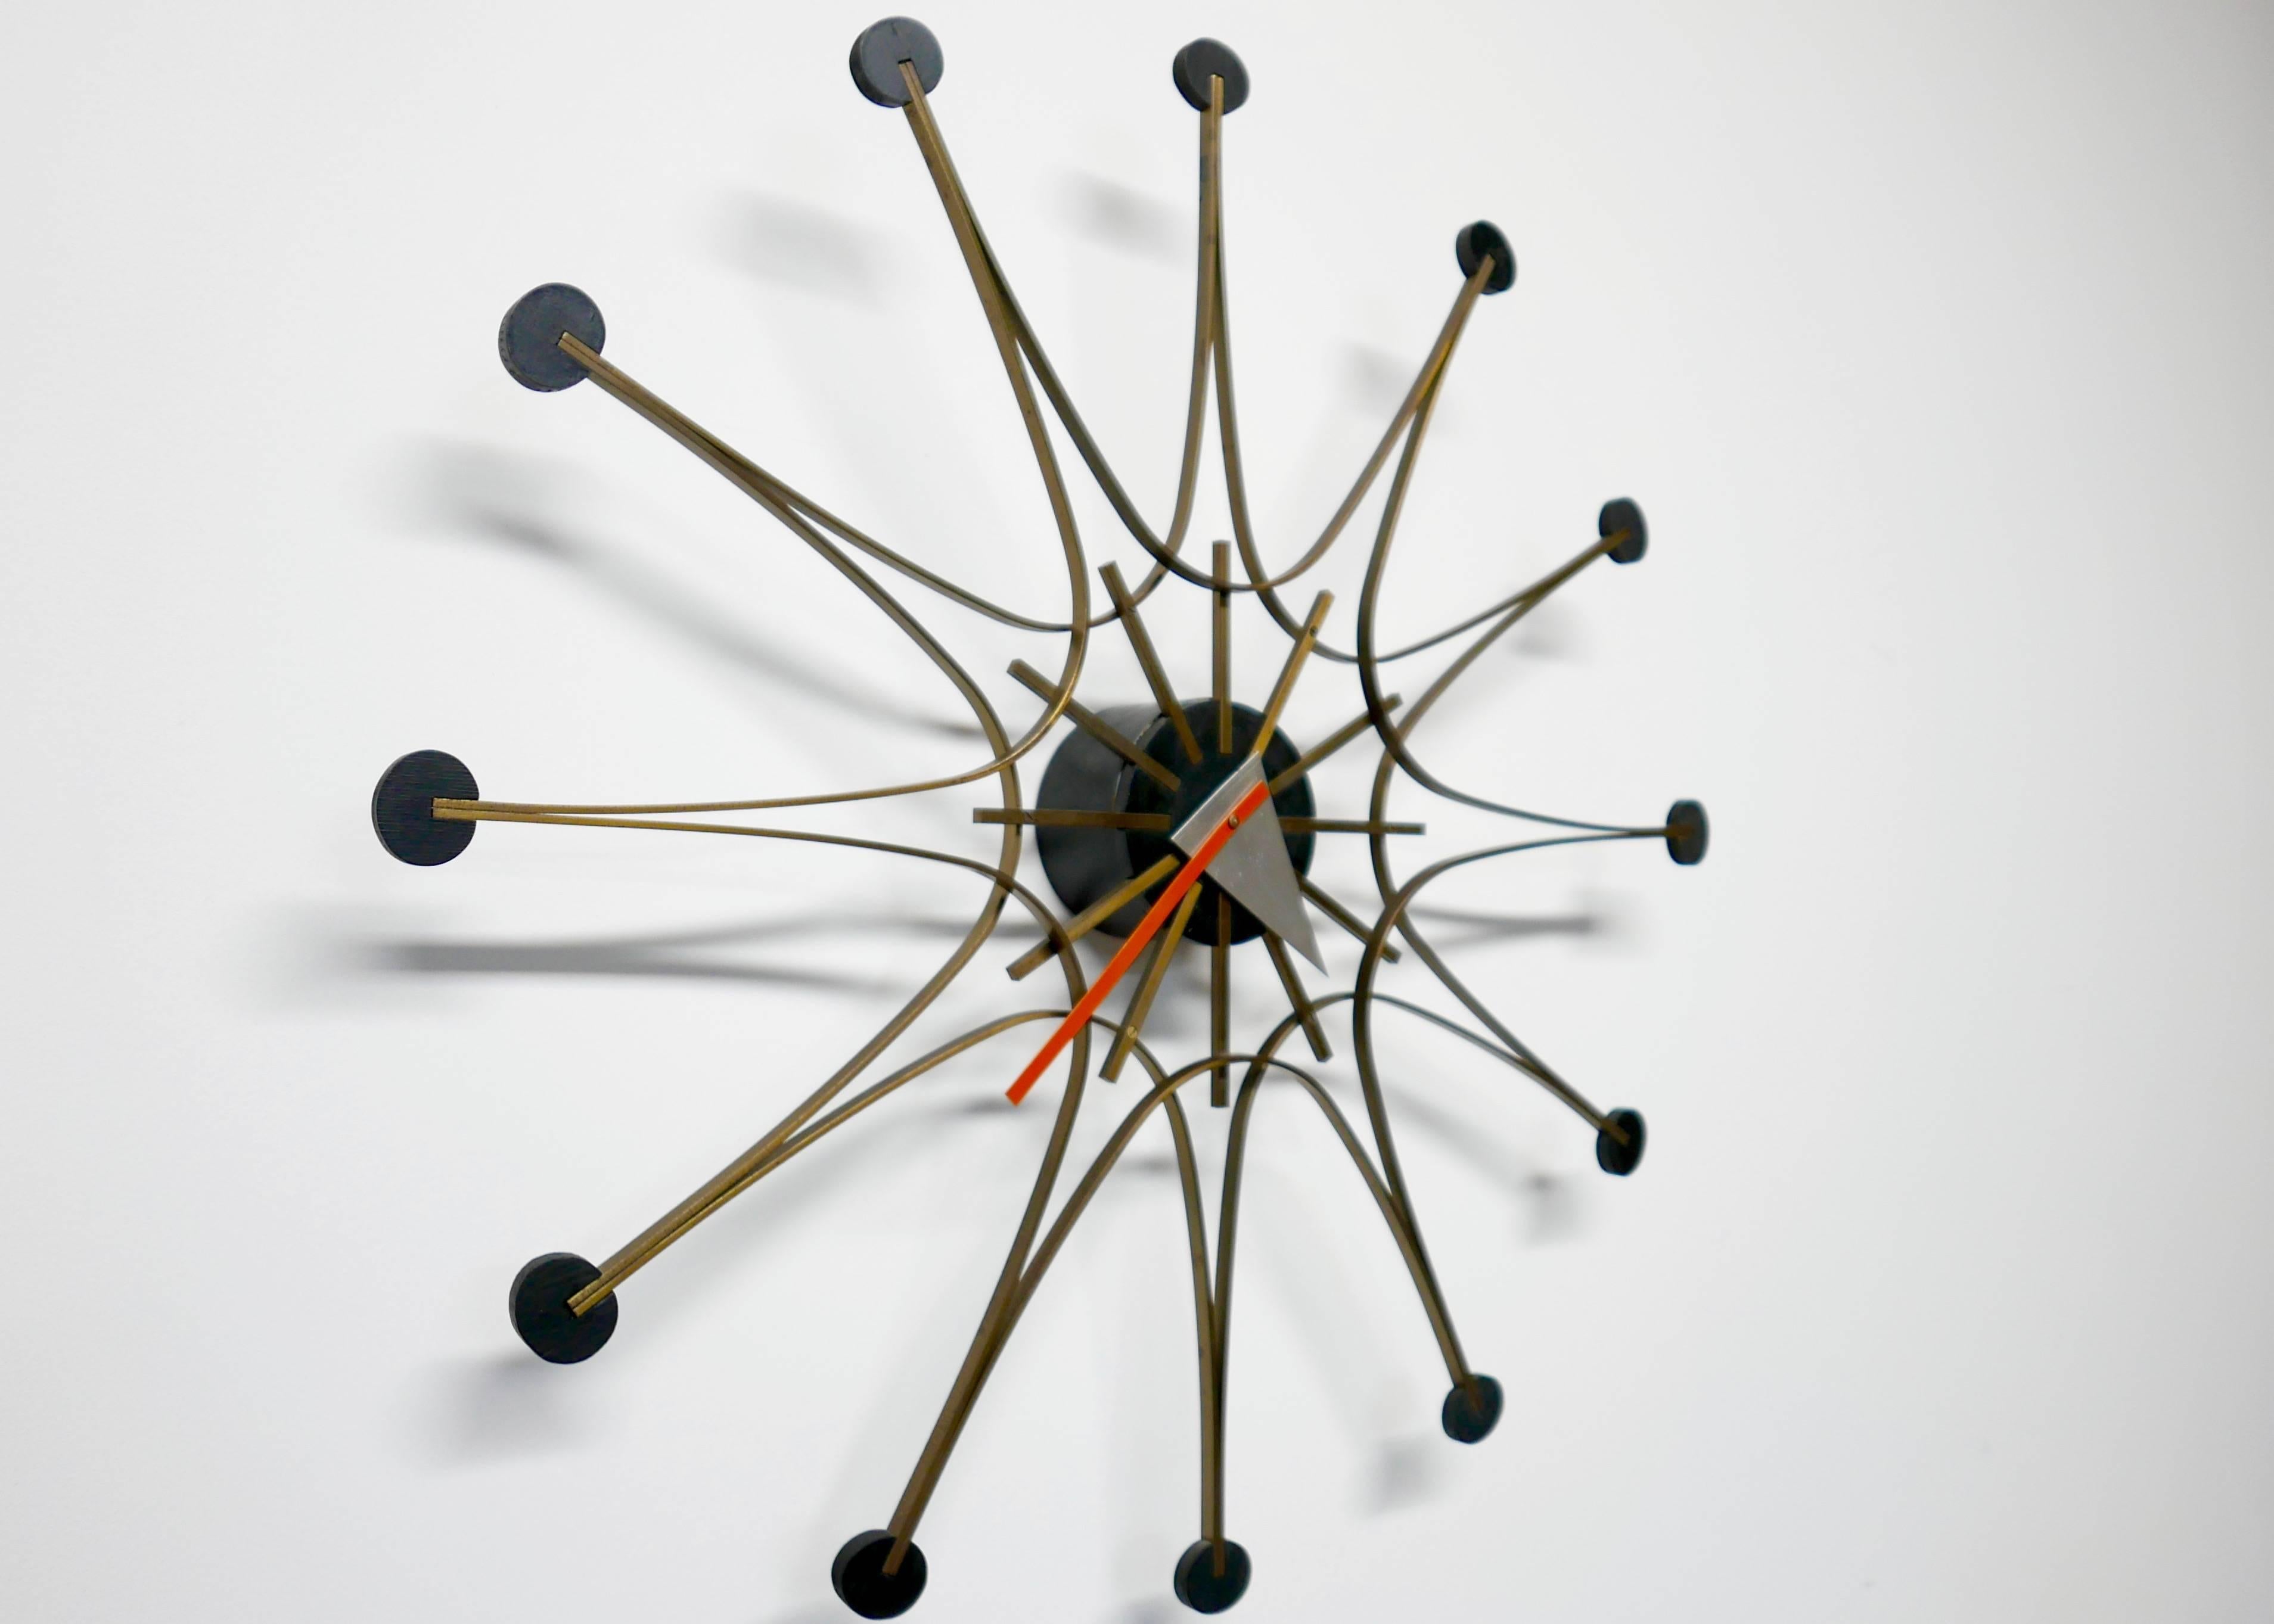 Howard Miller produced this rare George Nelson clock in 1957. The brass center is supported by aluminum rods and has lacquered wooden hour markers. This early form holds a mechanical key- wound driven movement.